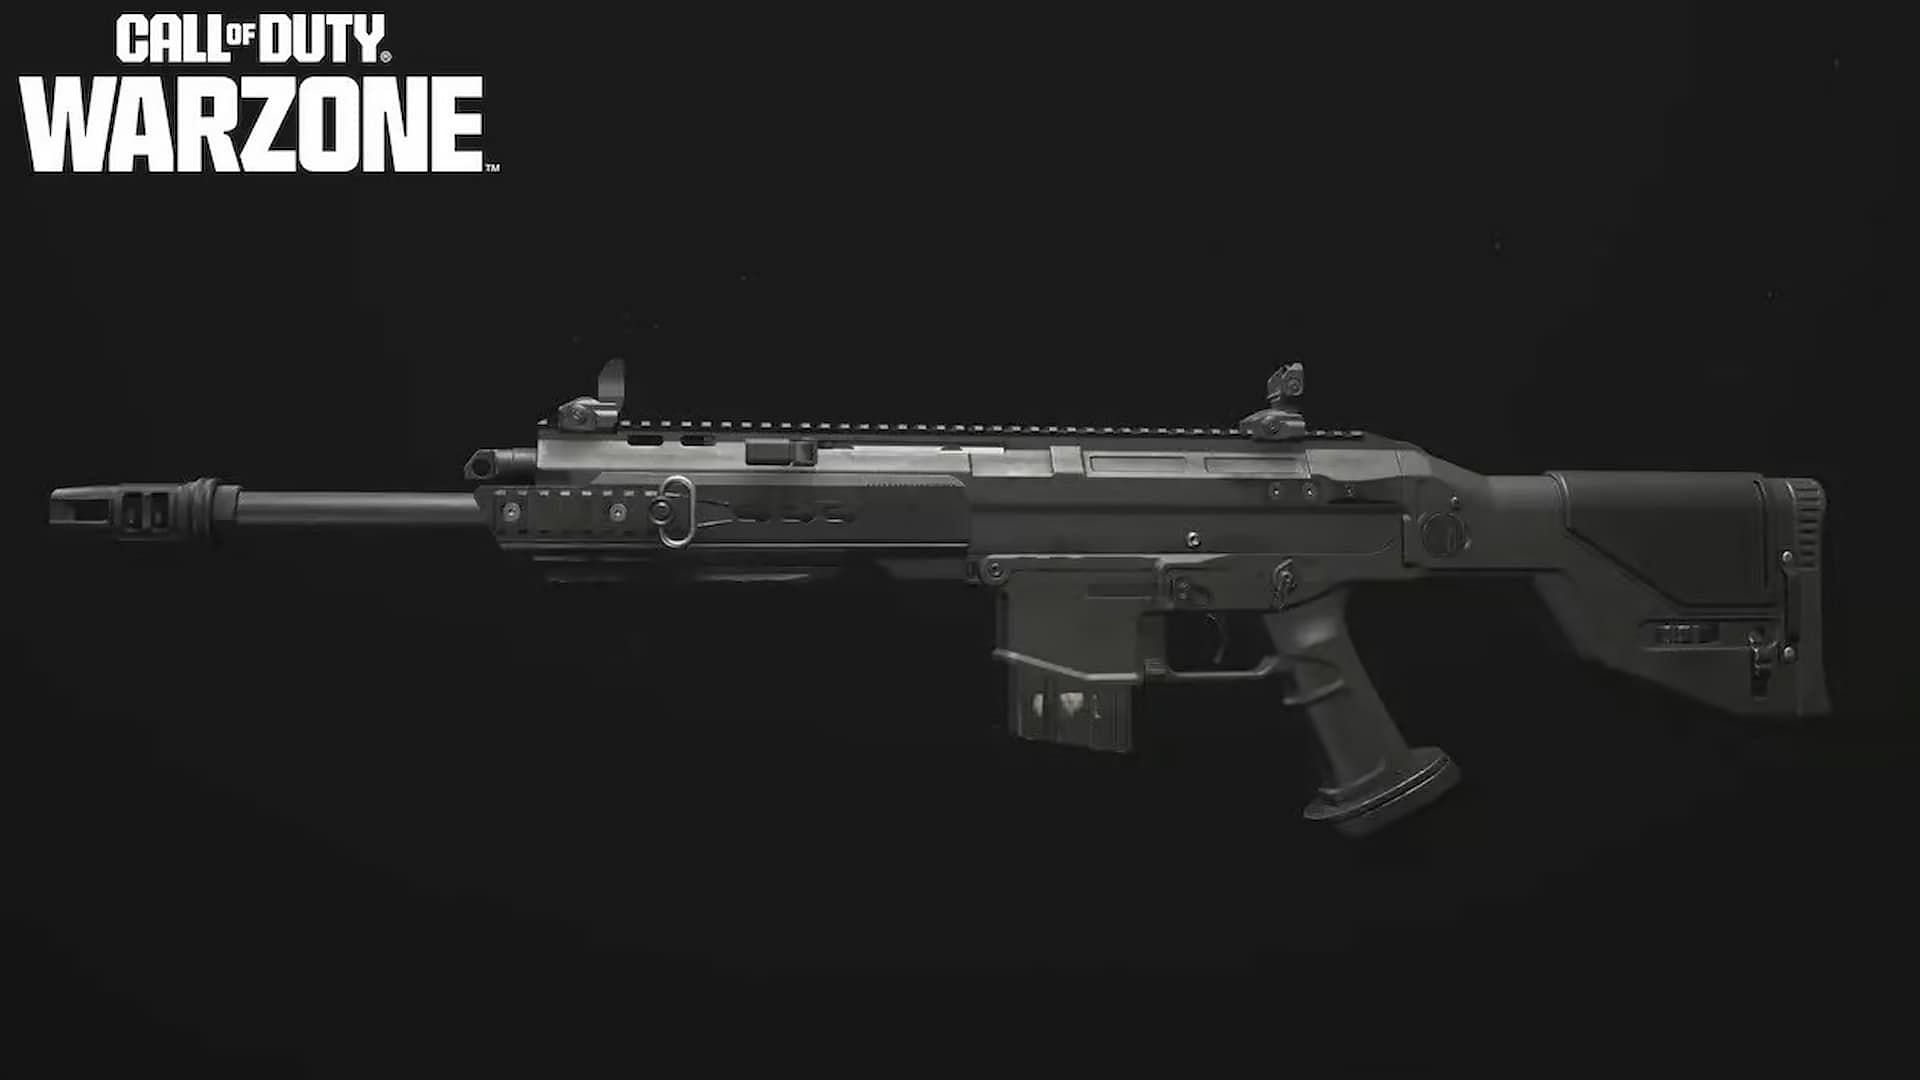 MCW 6.8 in Warzone (Image via Activision)